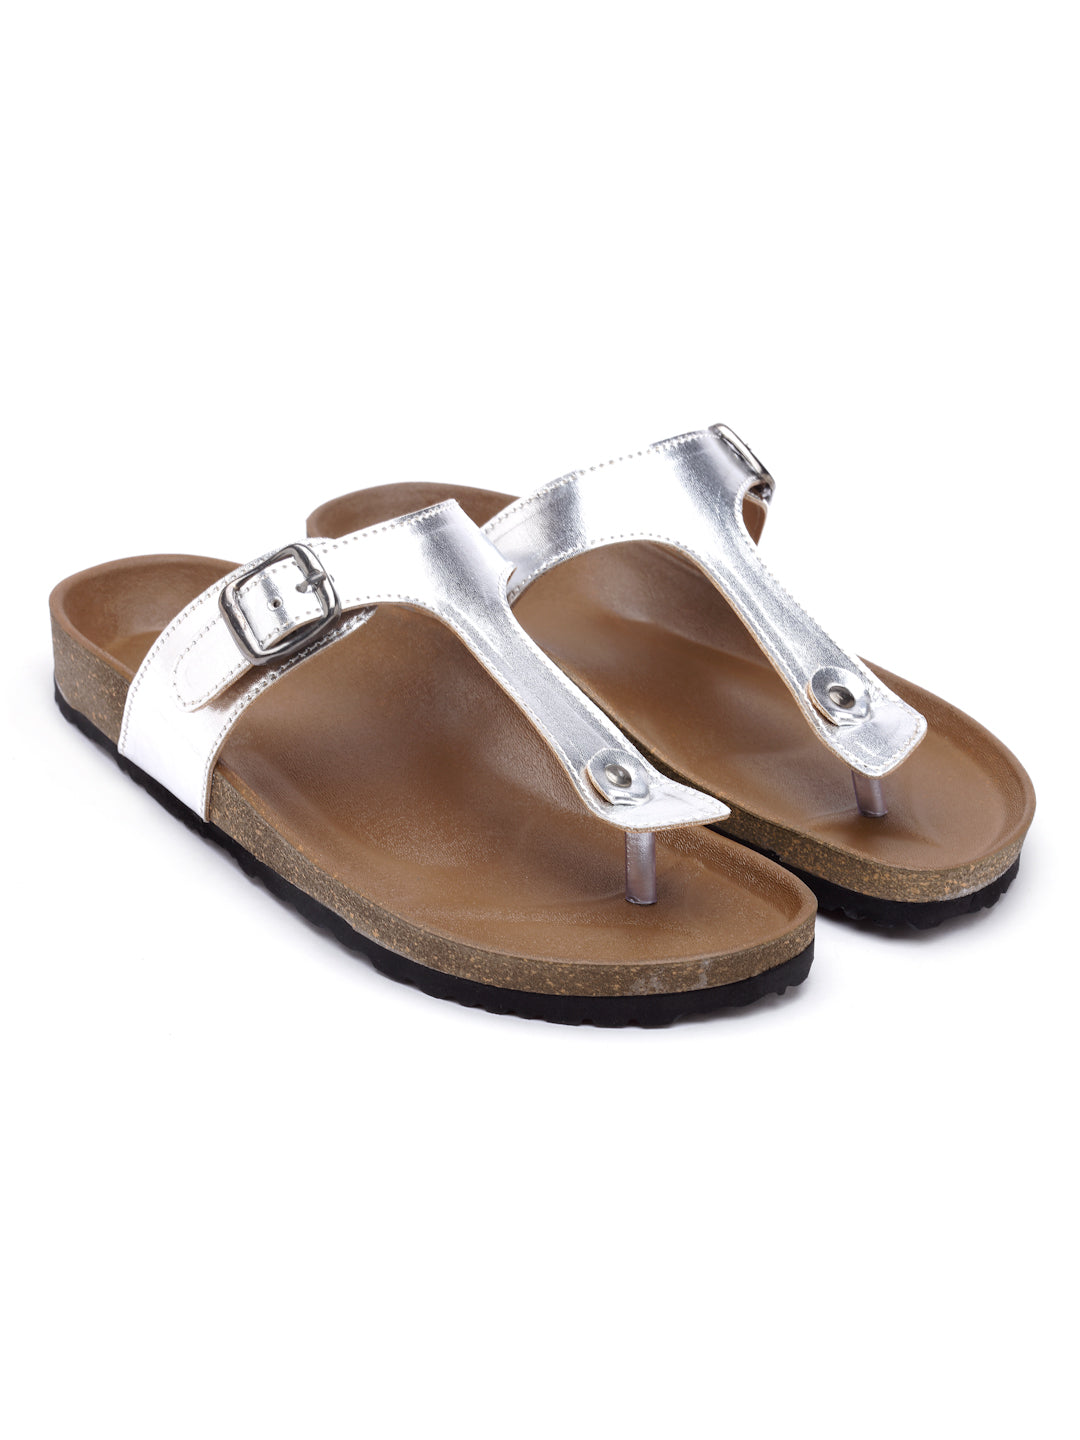 Women's Outdoor Stylish Silver Synthetic Leather Casual Sandal